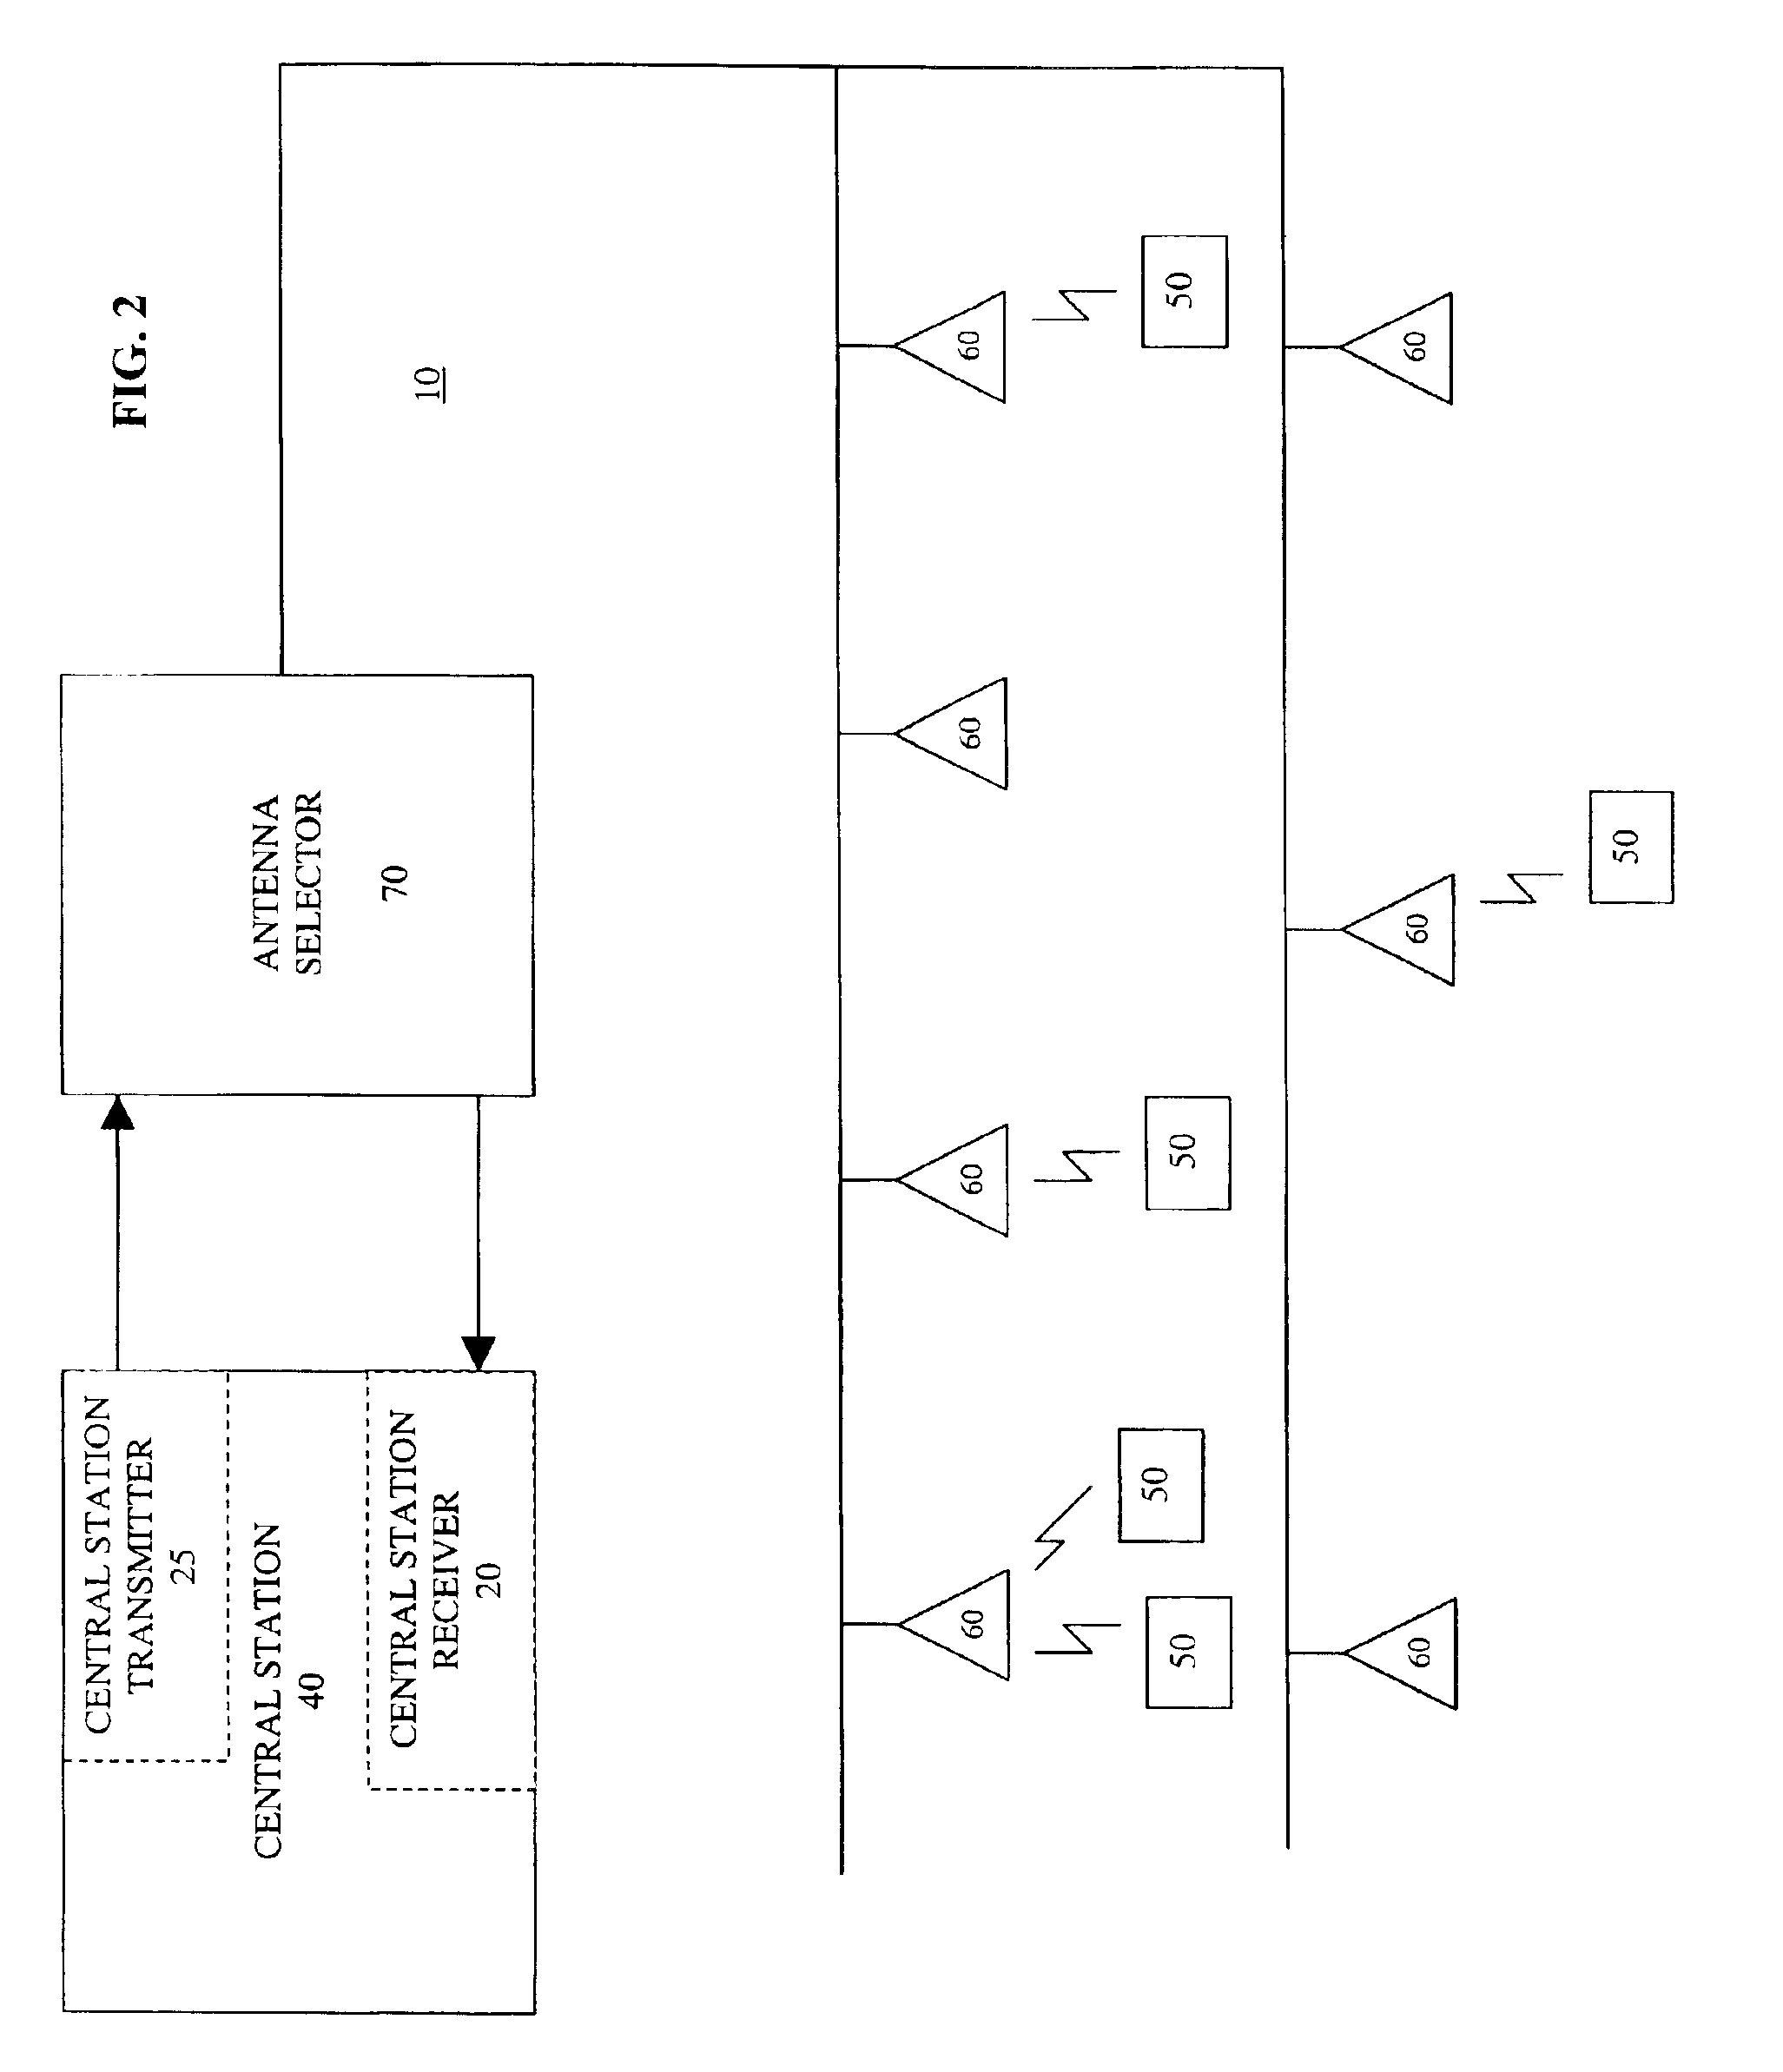 System and method for a low rate, in-band broadcast communication for medical telemetry